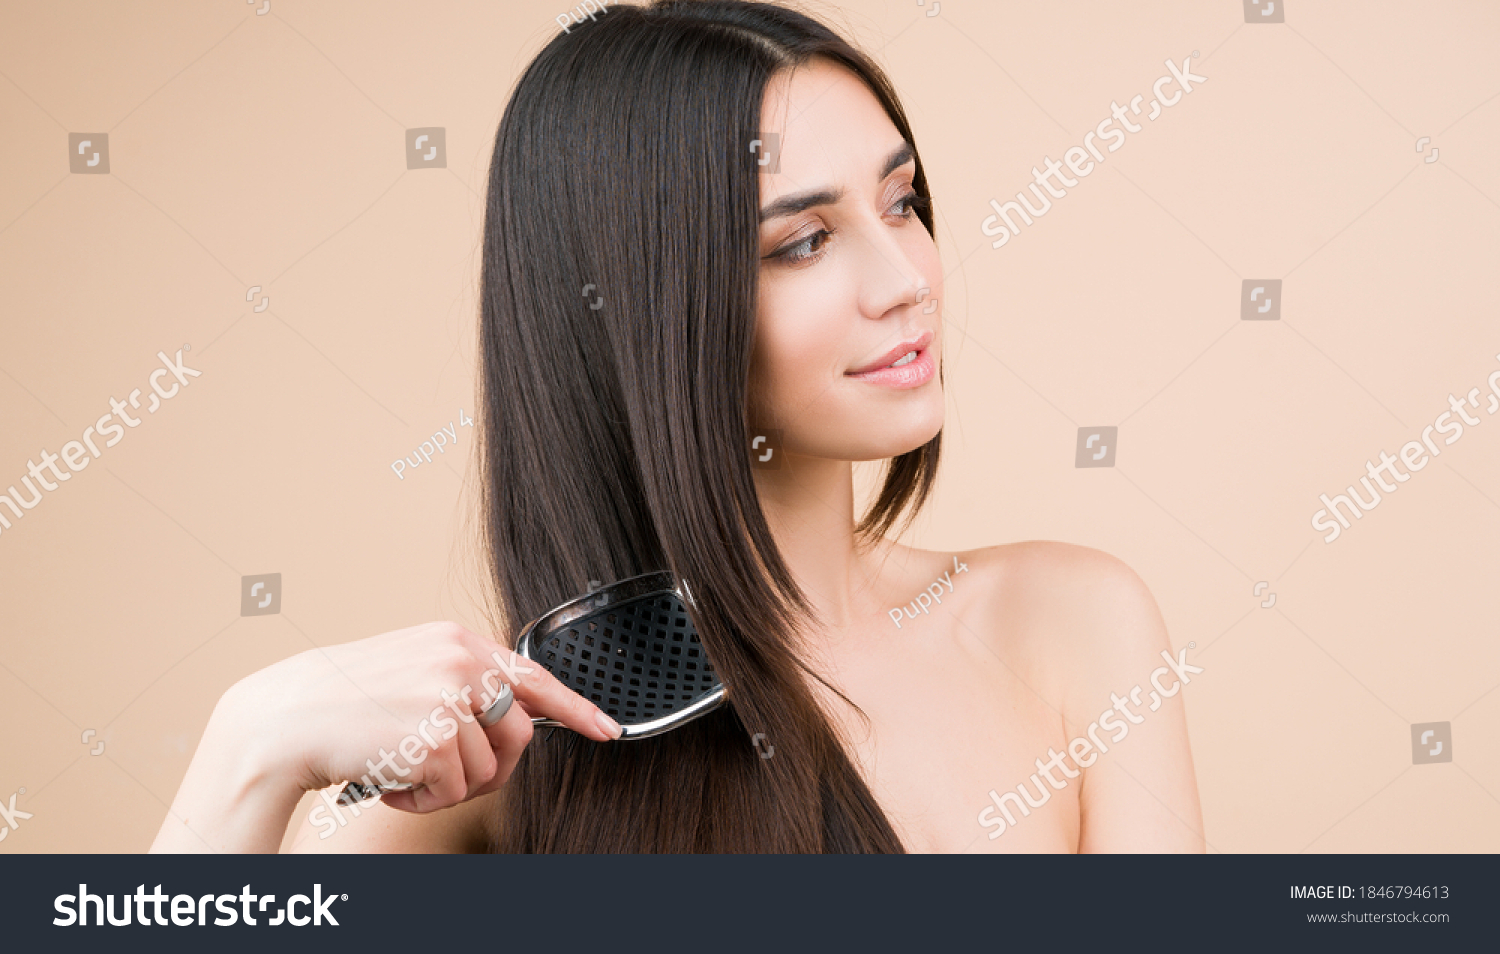 Brunette straight hair. Perfect woman with with a comb? Beautiful woman with long and shiny hair. Care. Female model after hair procedure. Natural health glance hair on beige background #1846794613